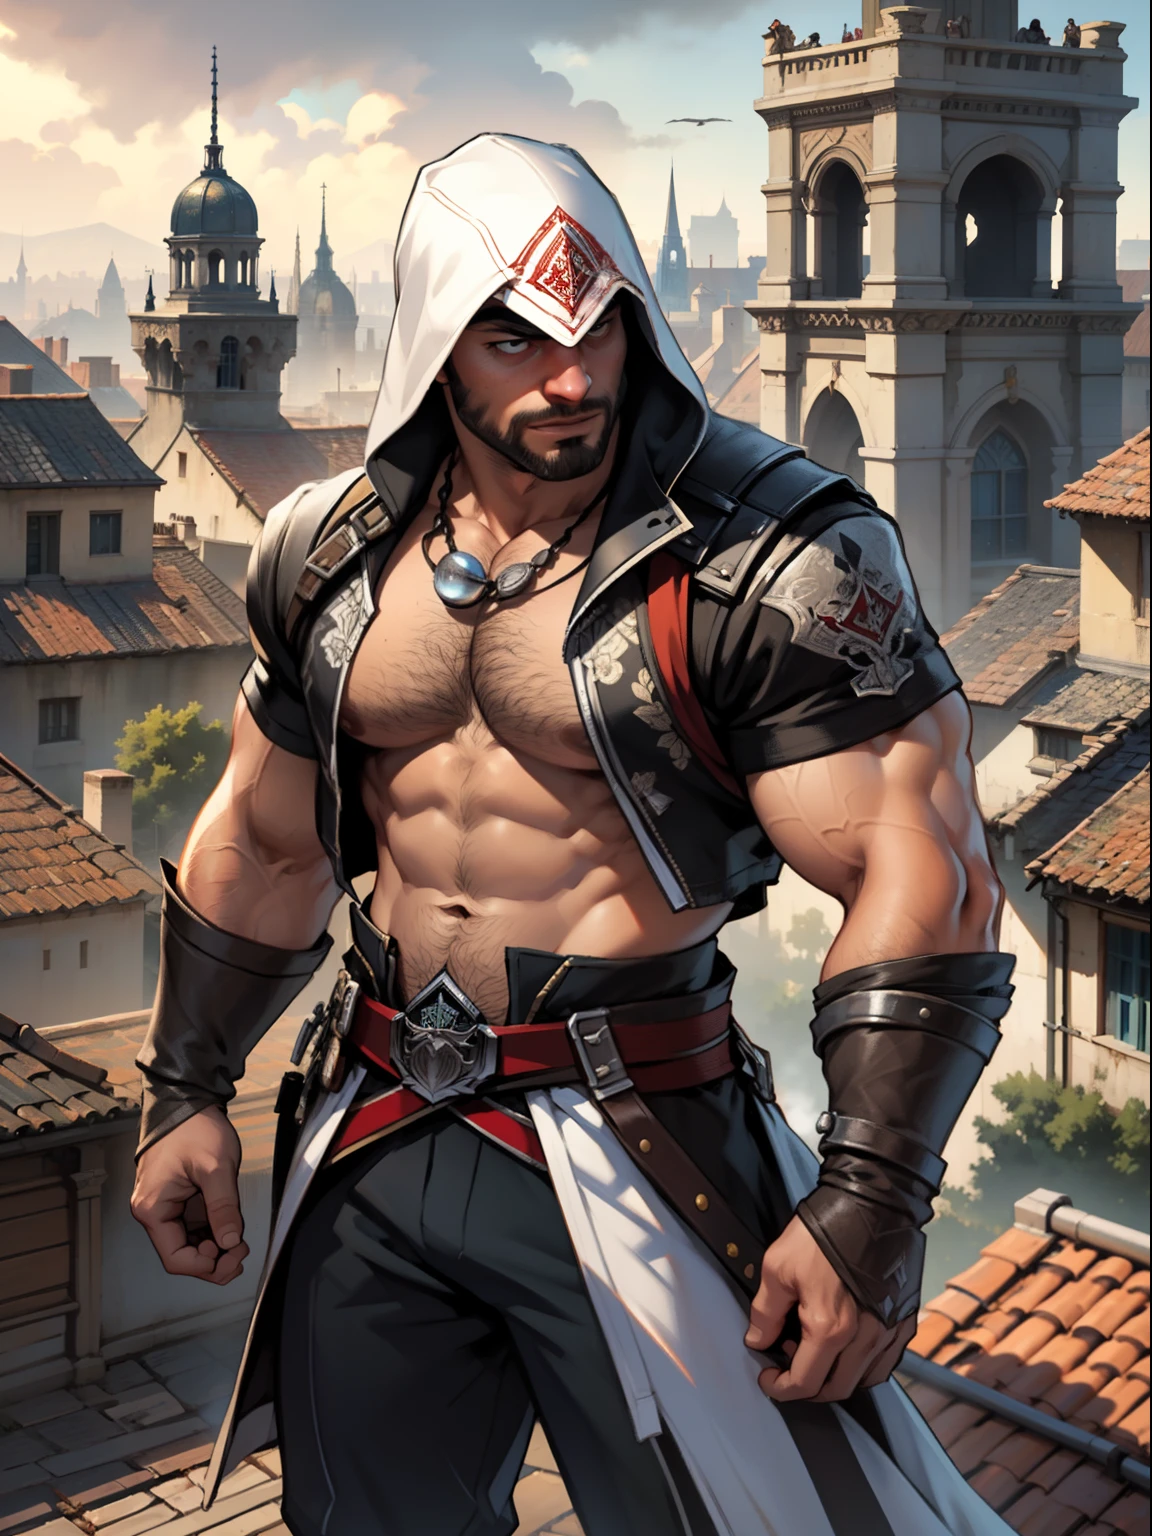 30 years old, male, assassin's creed, standing on top of a roof, panoramic view of the city, stubble, huge muscles, mature man, muscle swelling, bodybuilding, chest muscles, abs, natural light, 1man, steam punk, the dark ages, ancient European city